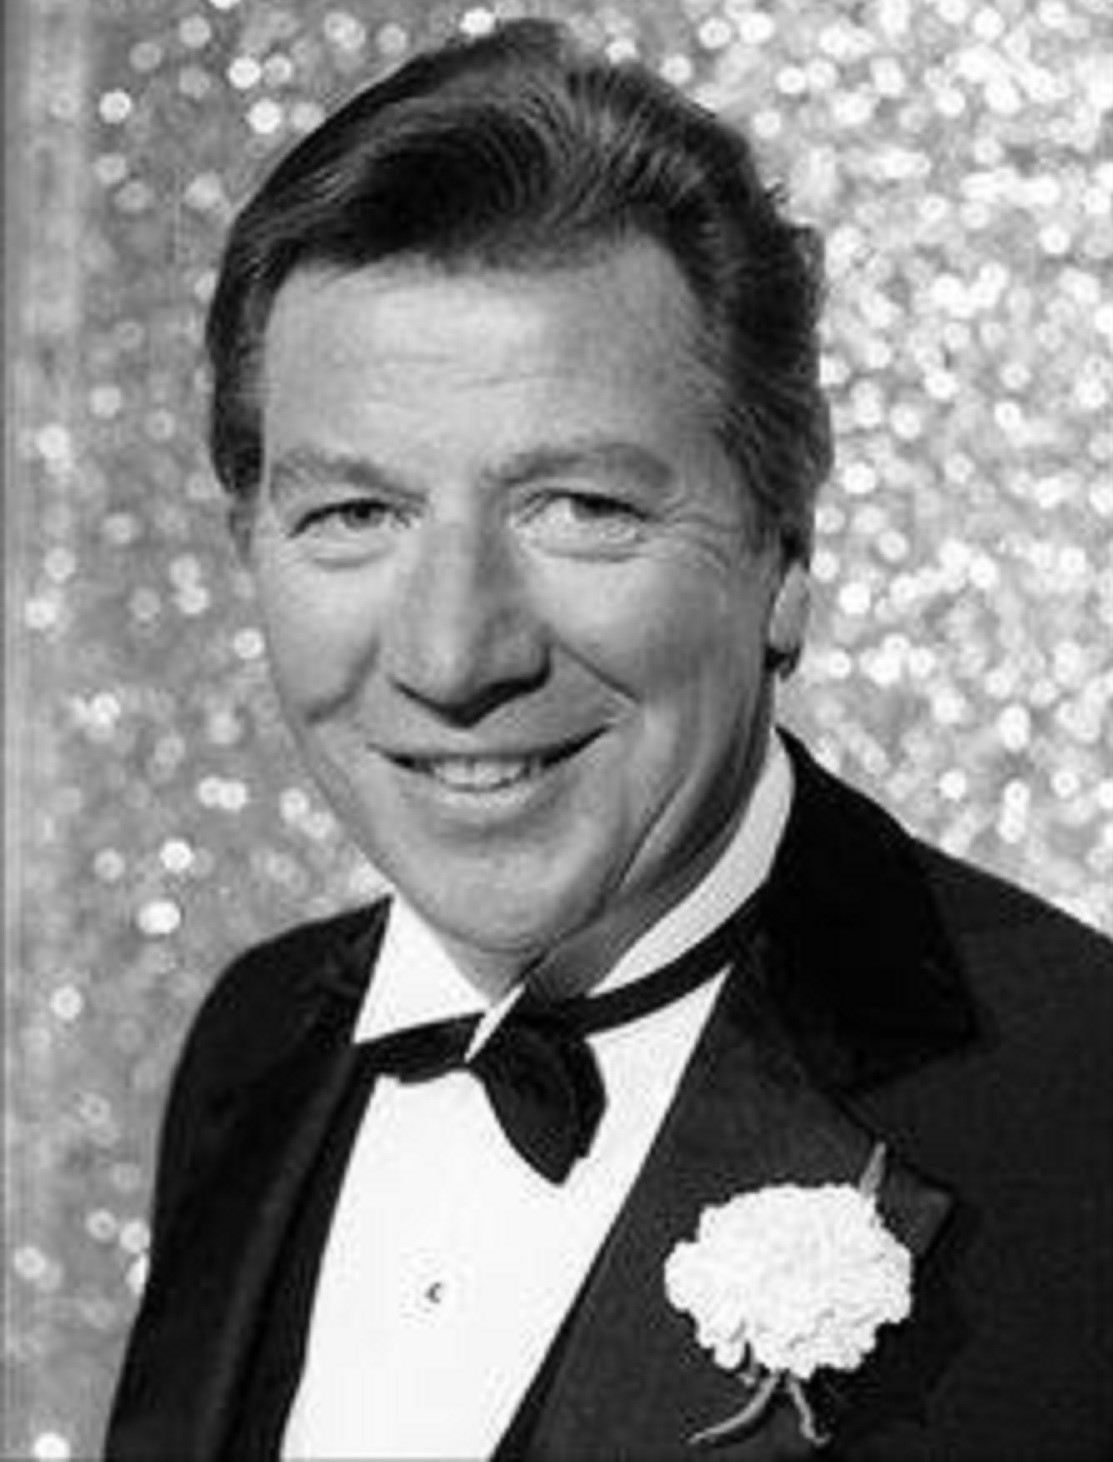 Max Bygraves, who wrote a song about decimalisation. Pic: BBC